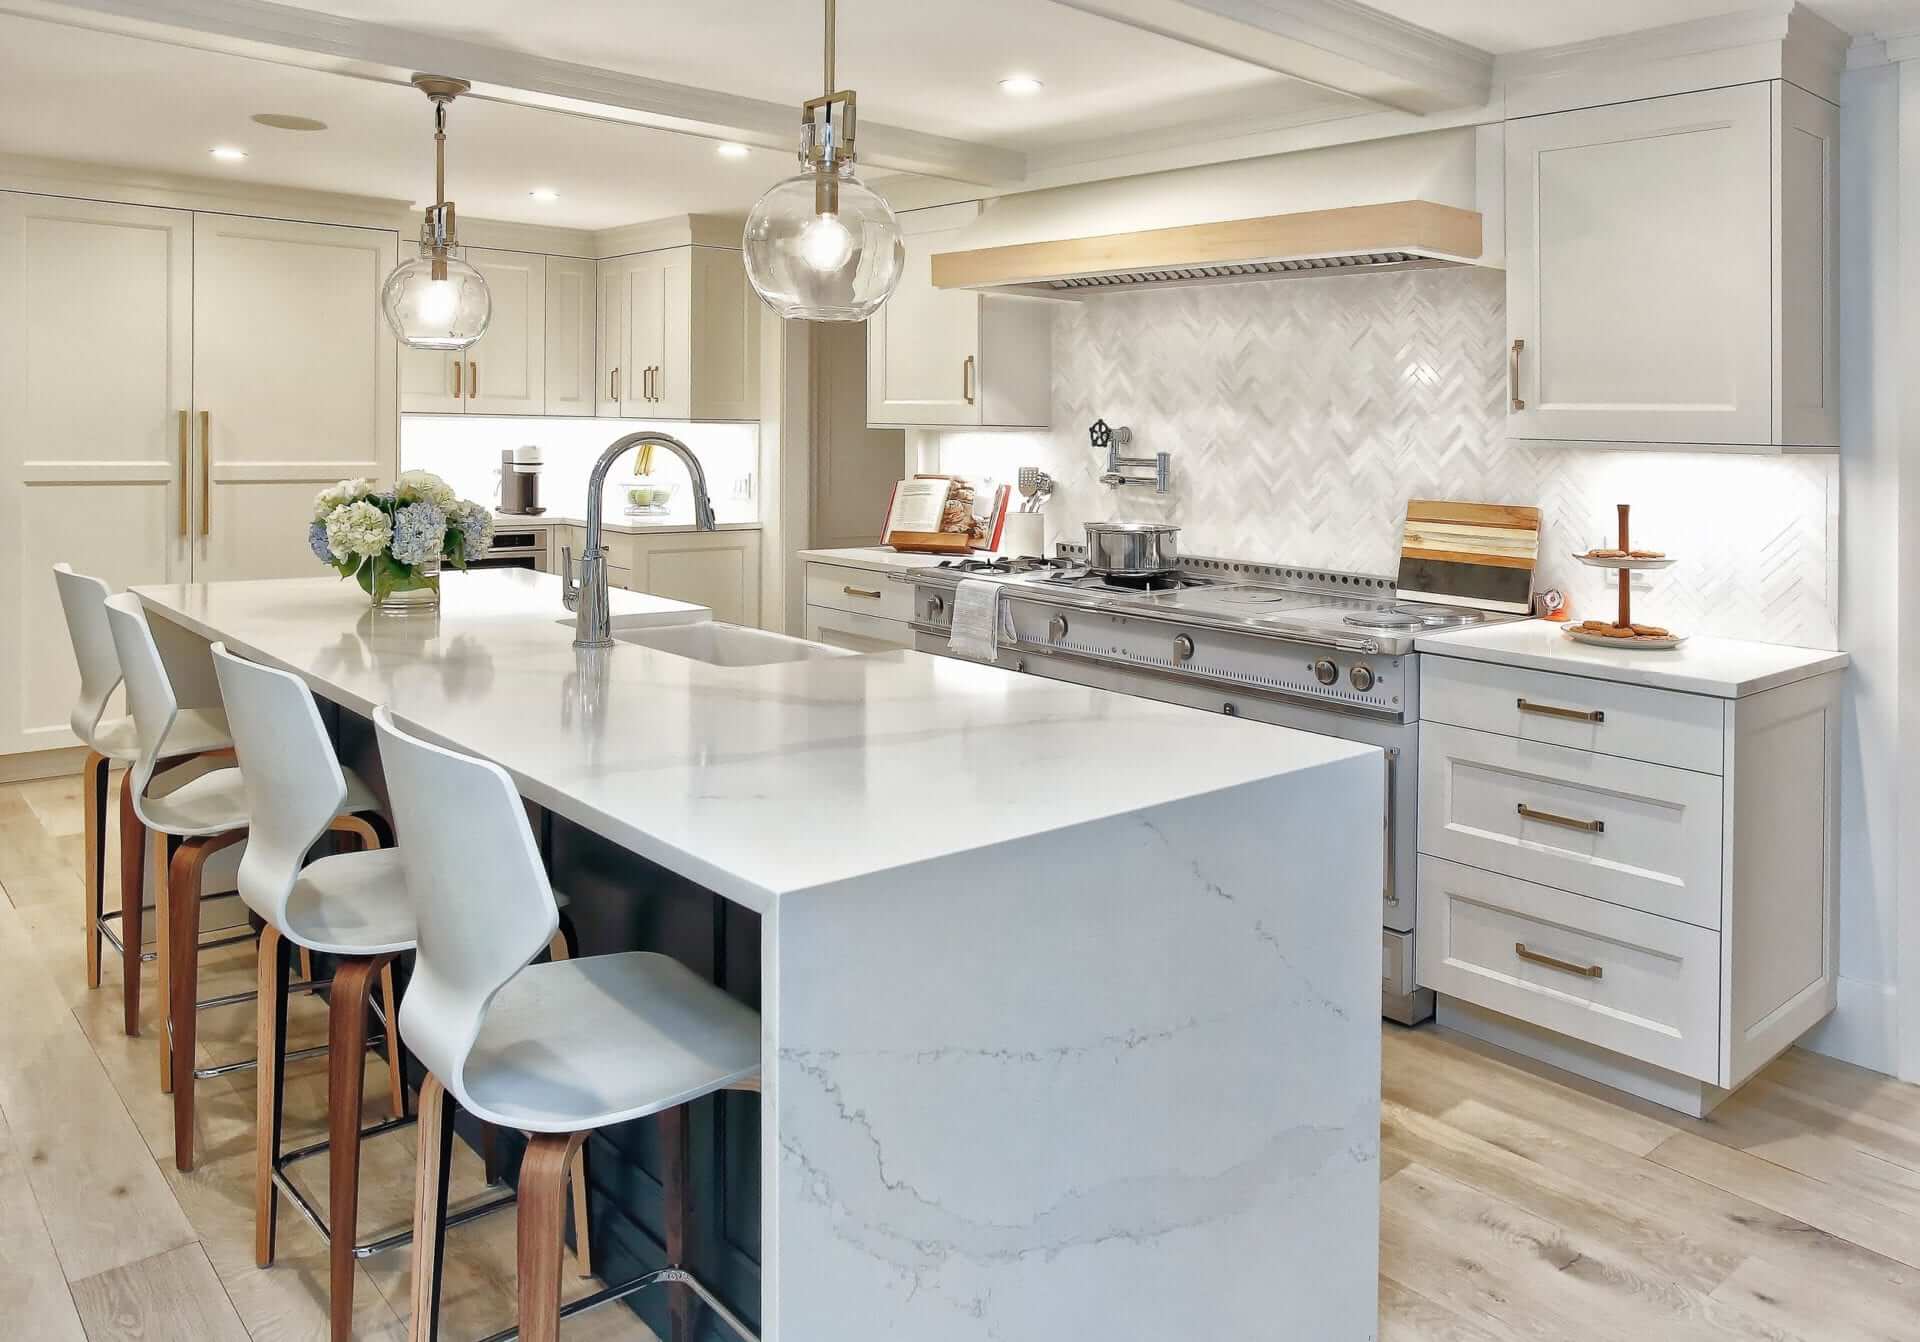 Kitchen features grey veined marble waterfall island, white custom NAC cabinetry, chevron tile backsplash & antique-inspired accents.